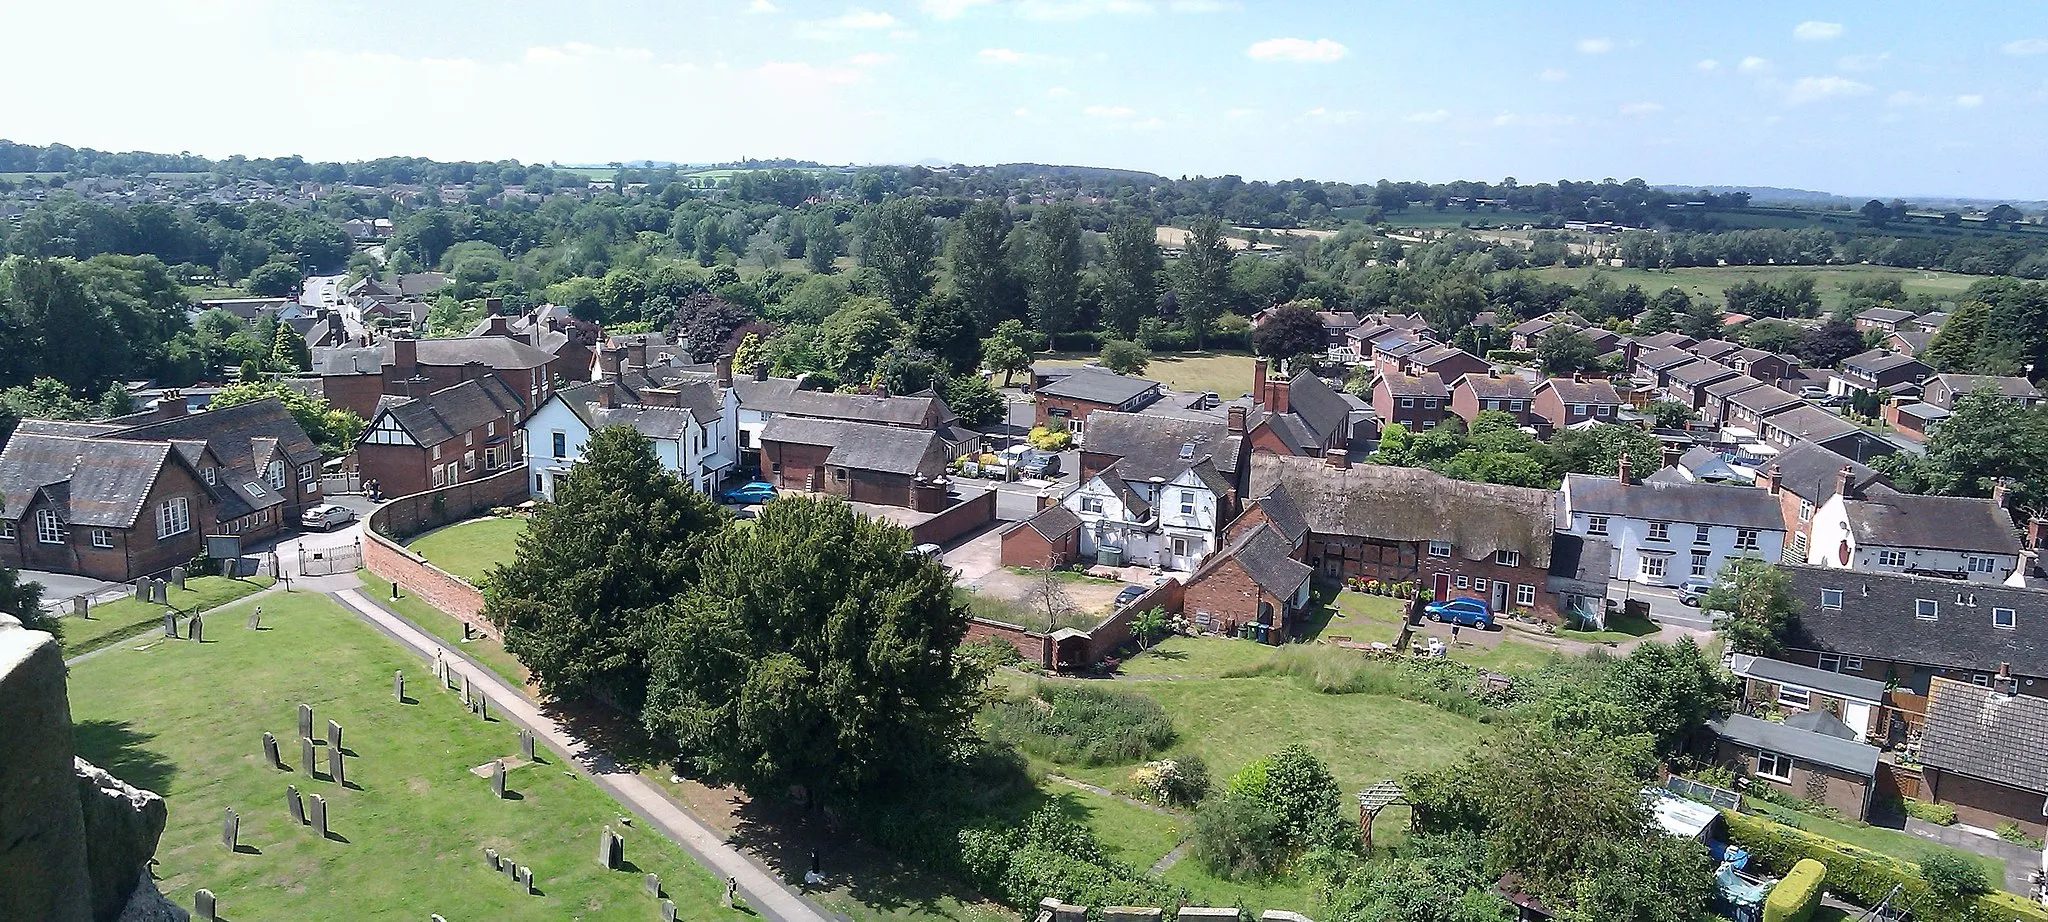 Photo showing: A view of Gnosall High Street and Gnosall Heath as seen from the top of the tower of St Lawrence's church.